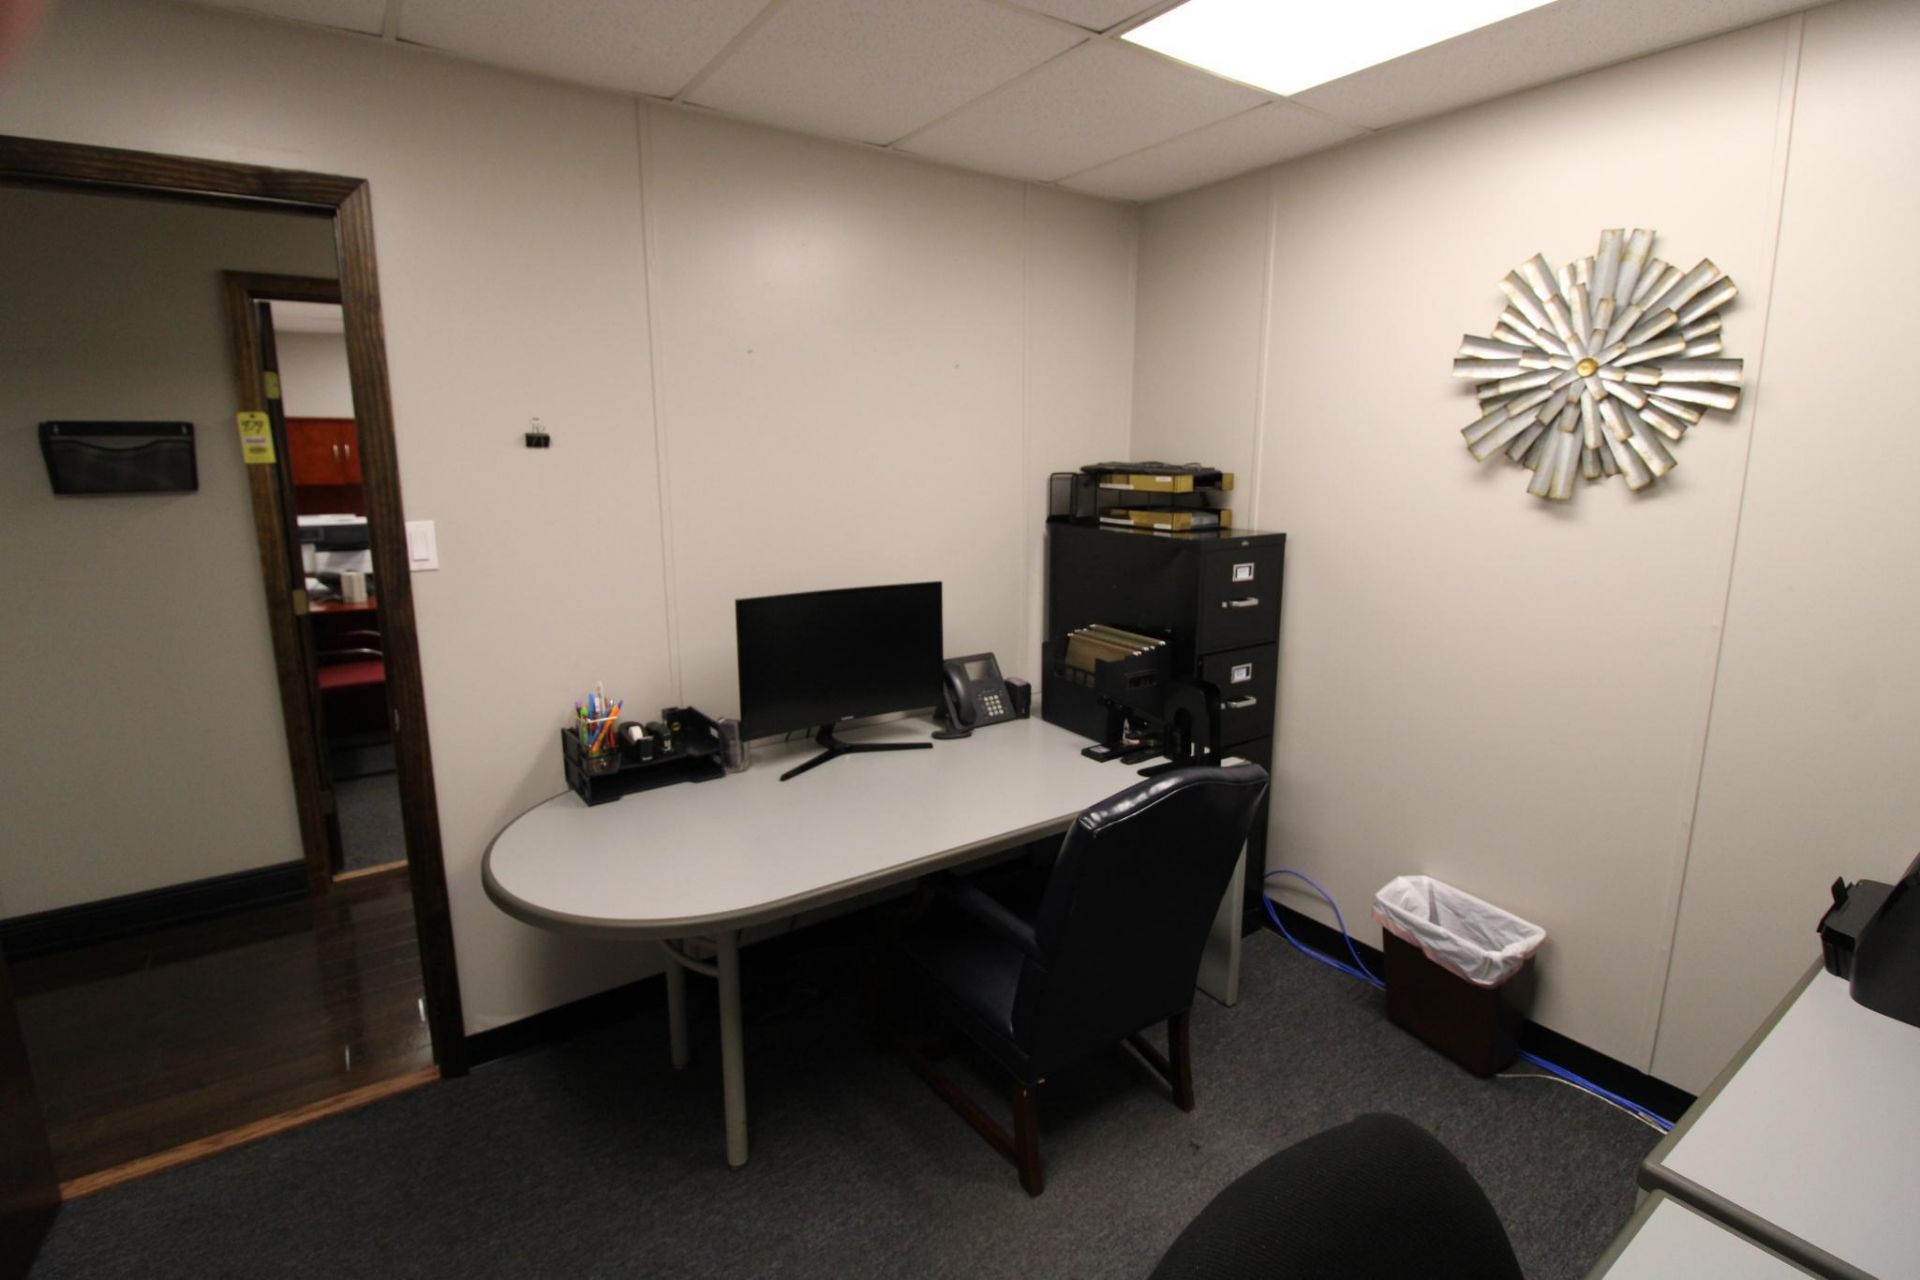 LOT CONTENTS OF OFFICE: desk, credenza, file cabinet, copy paper, printers, etc. - Image 2 of 5